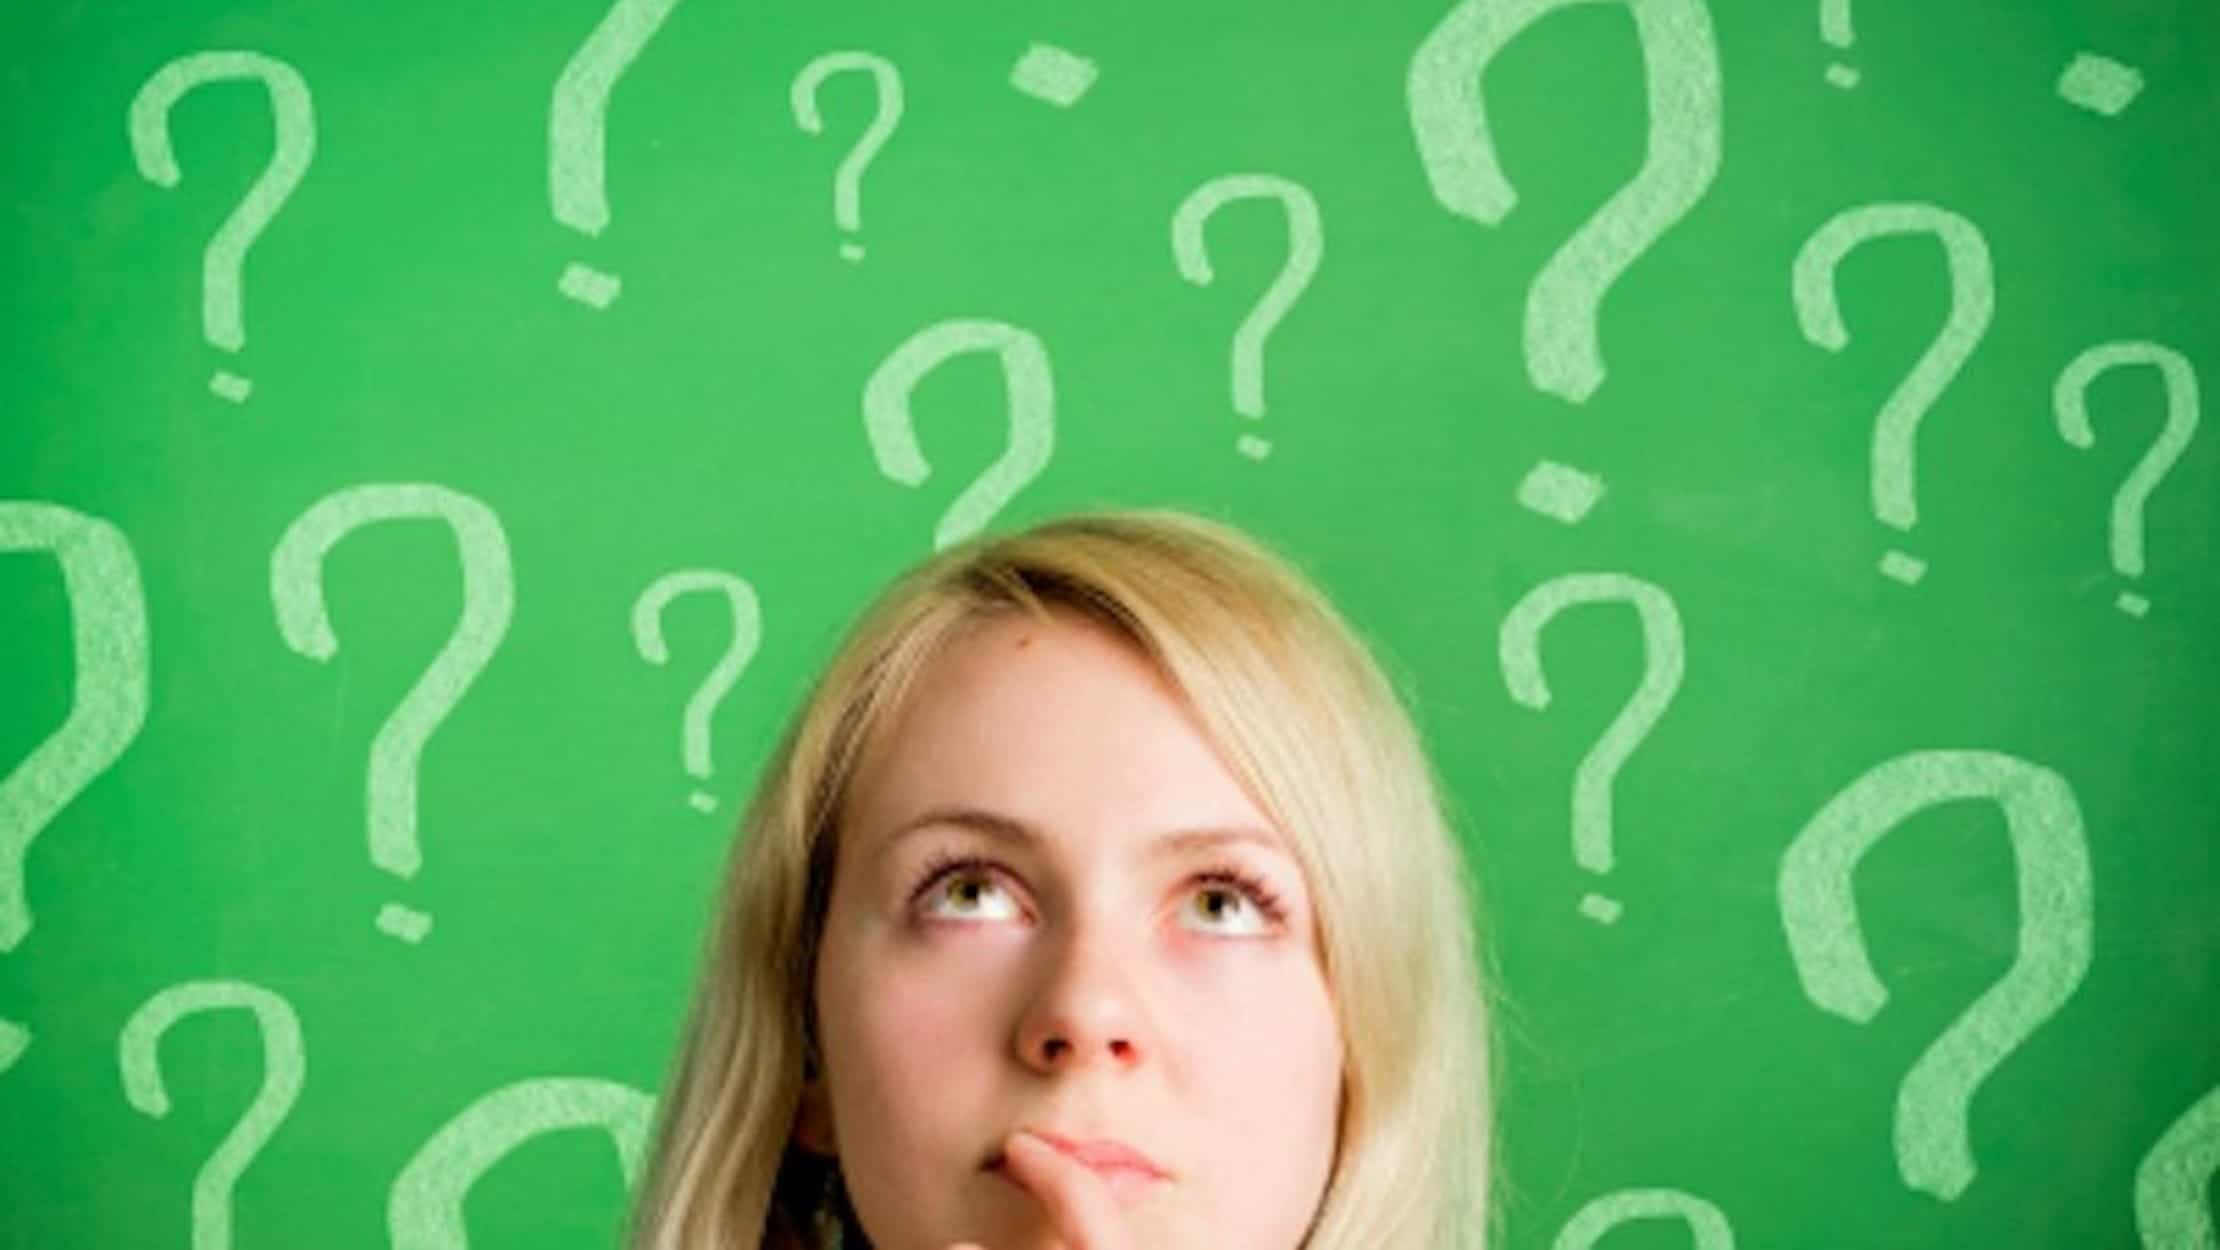 Mom's head on a green background with questions marks floating above